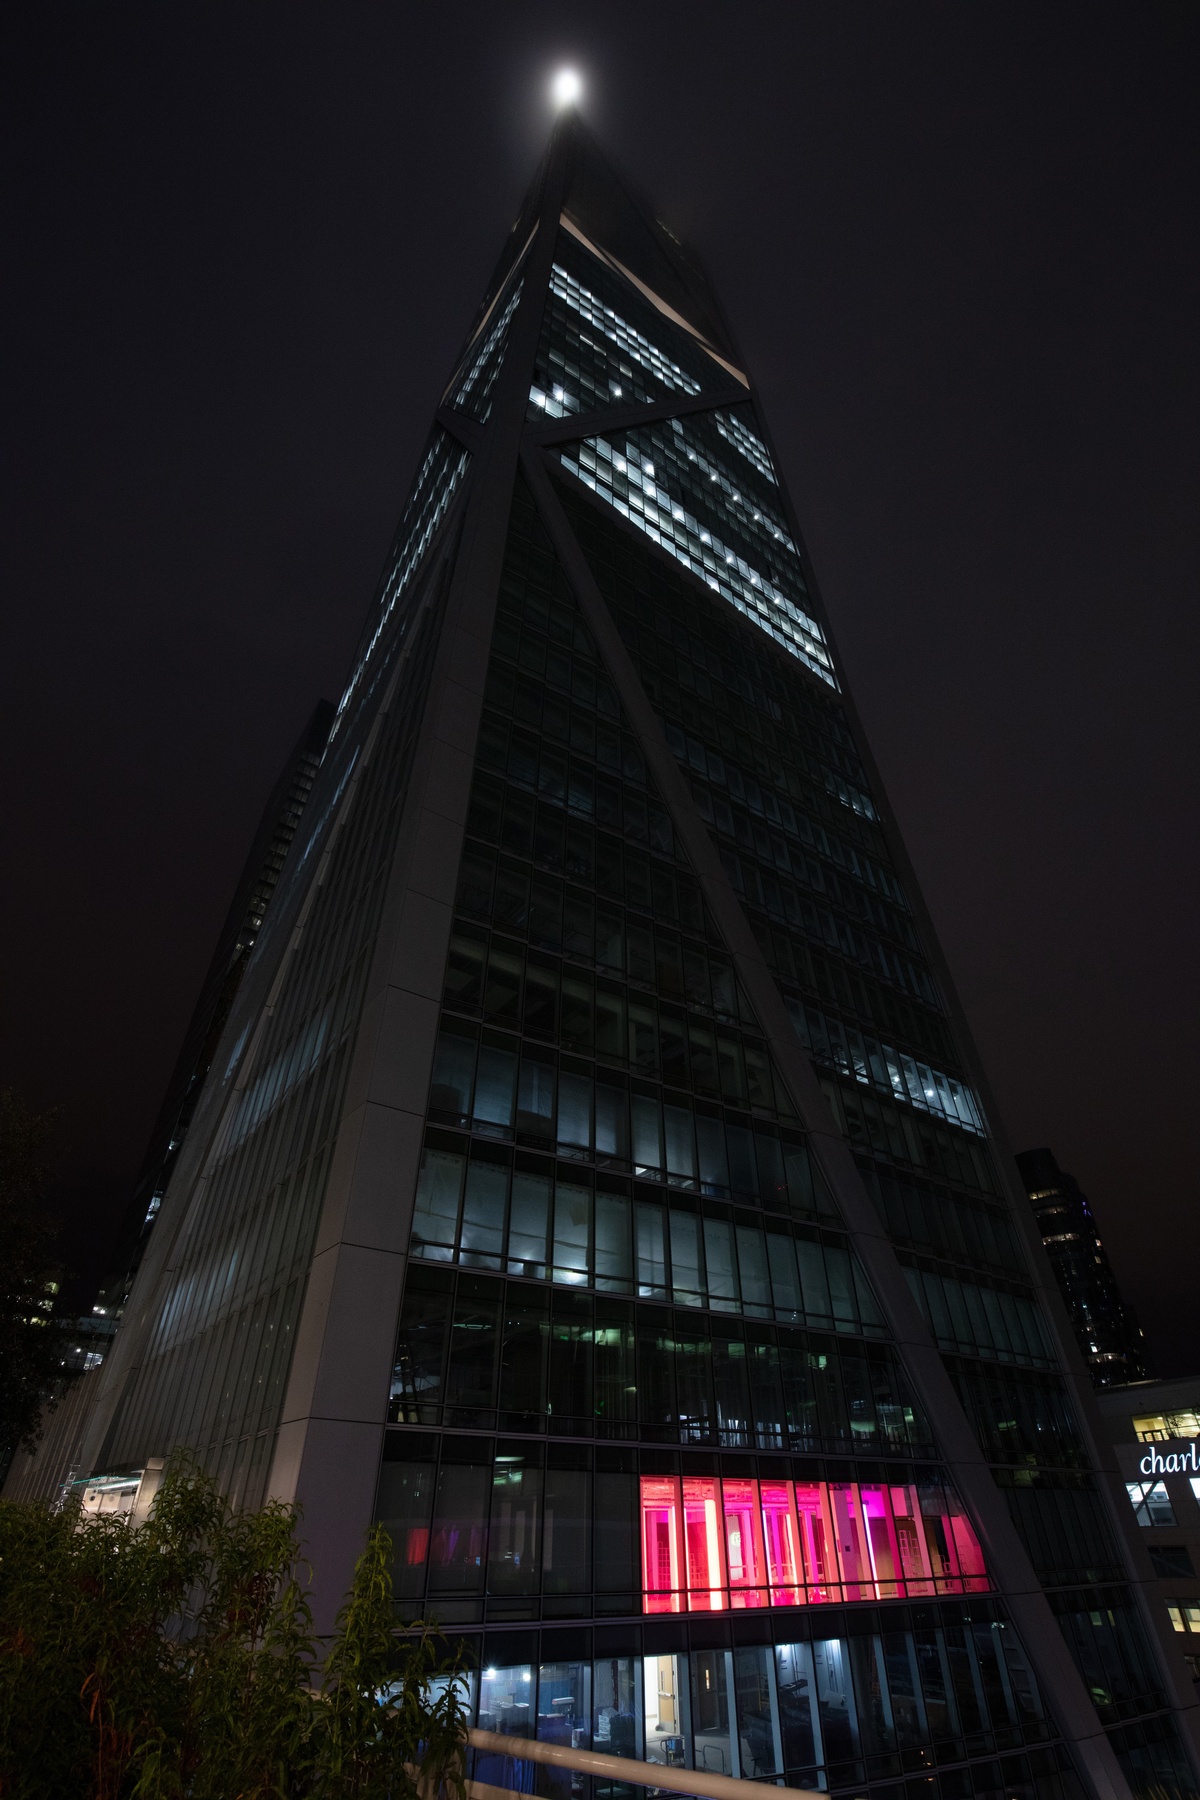 Tall building with room illuminated in pink light